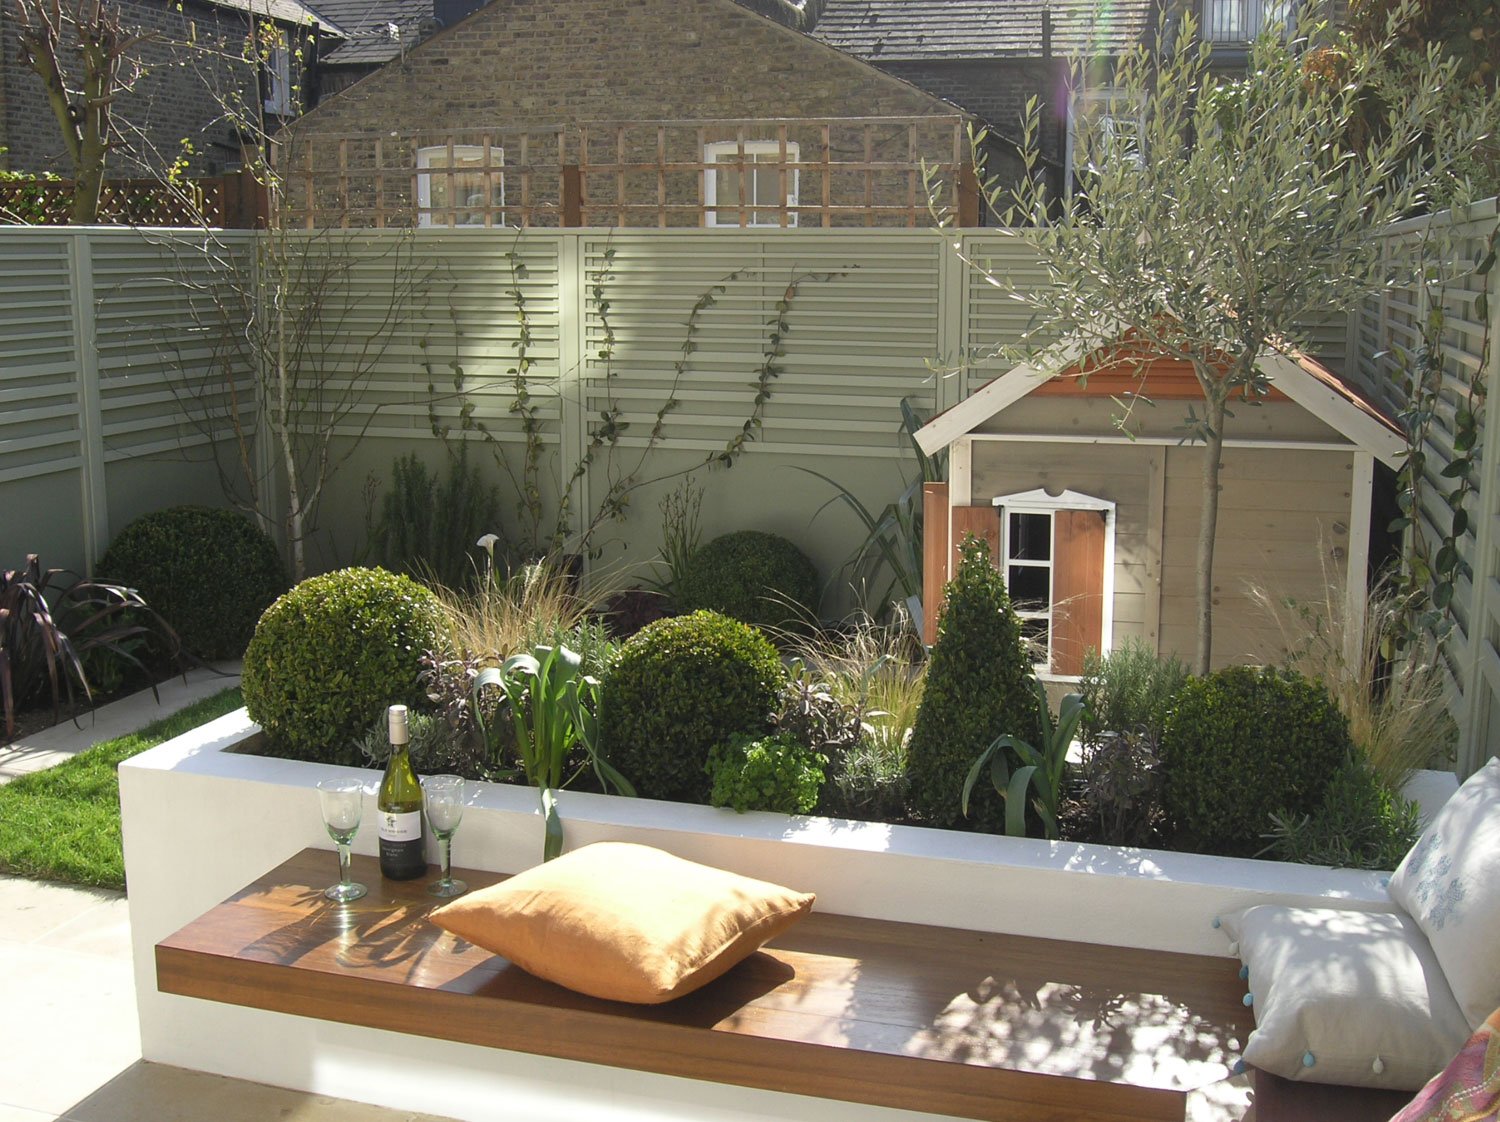  Family focused garden design with space to play and socialise in London. 